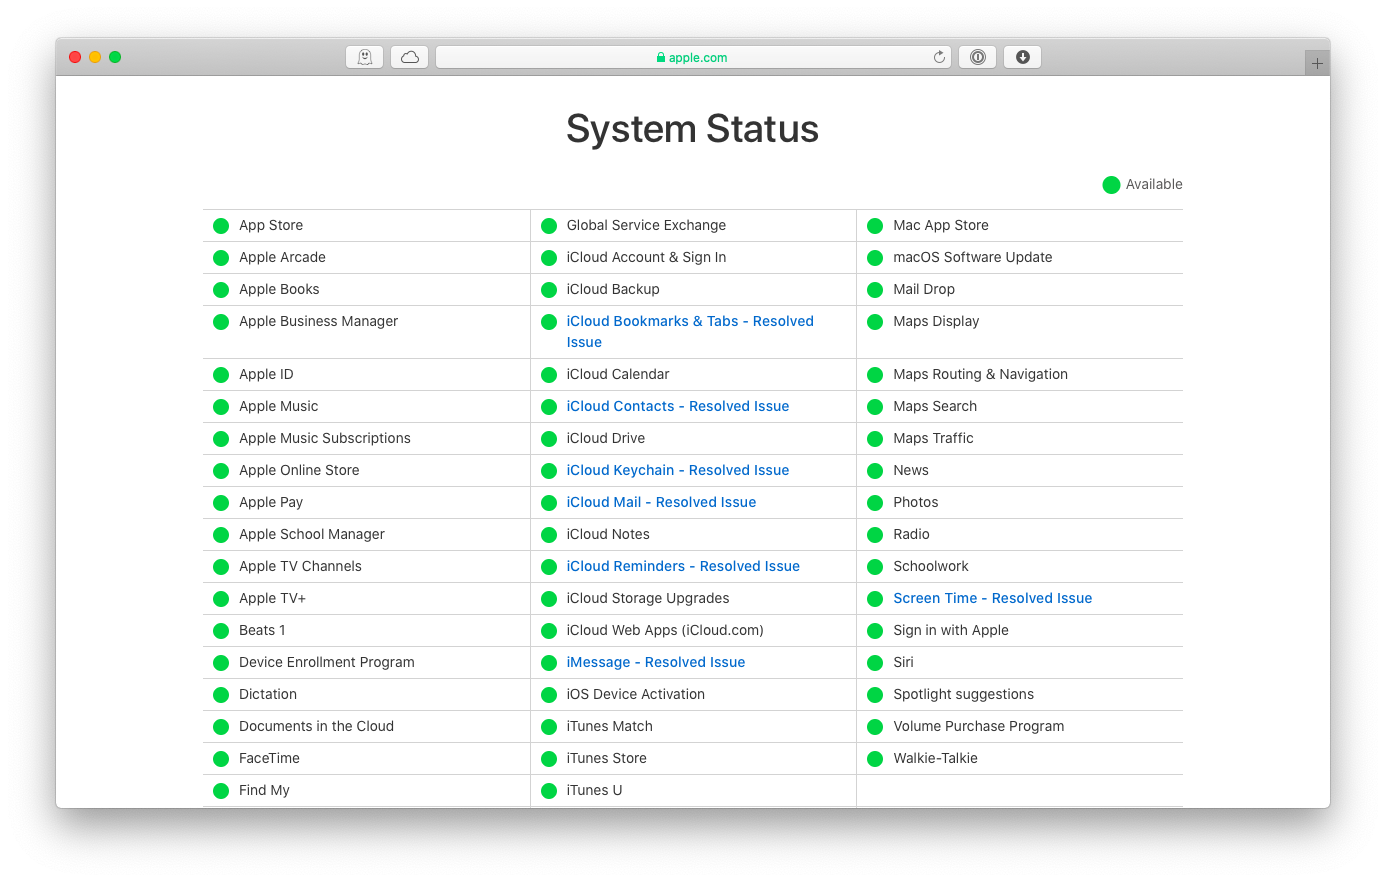 macOS software update system status